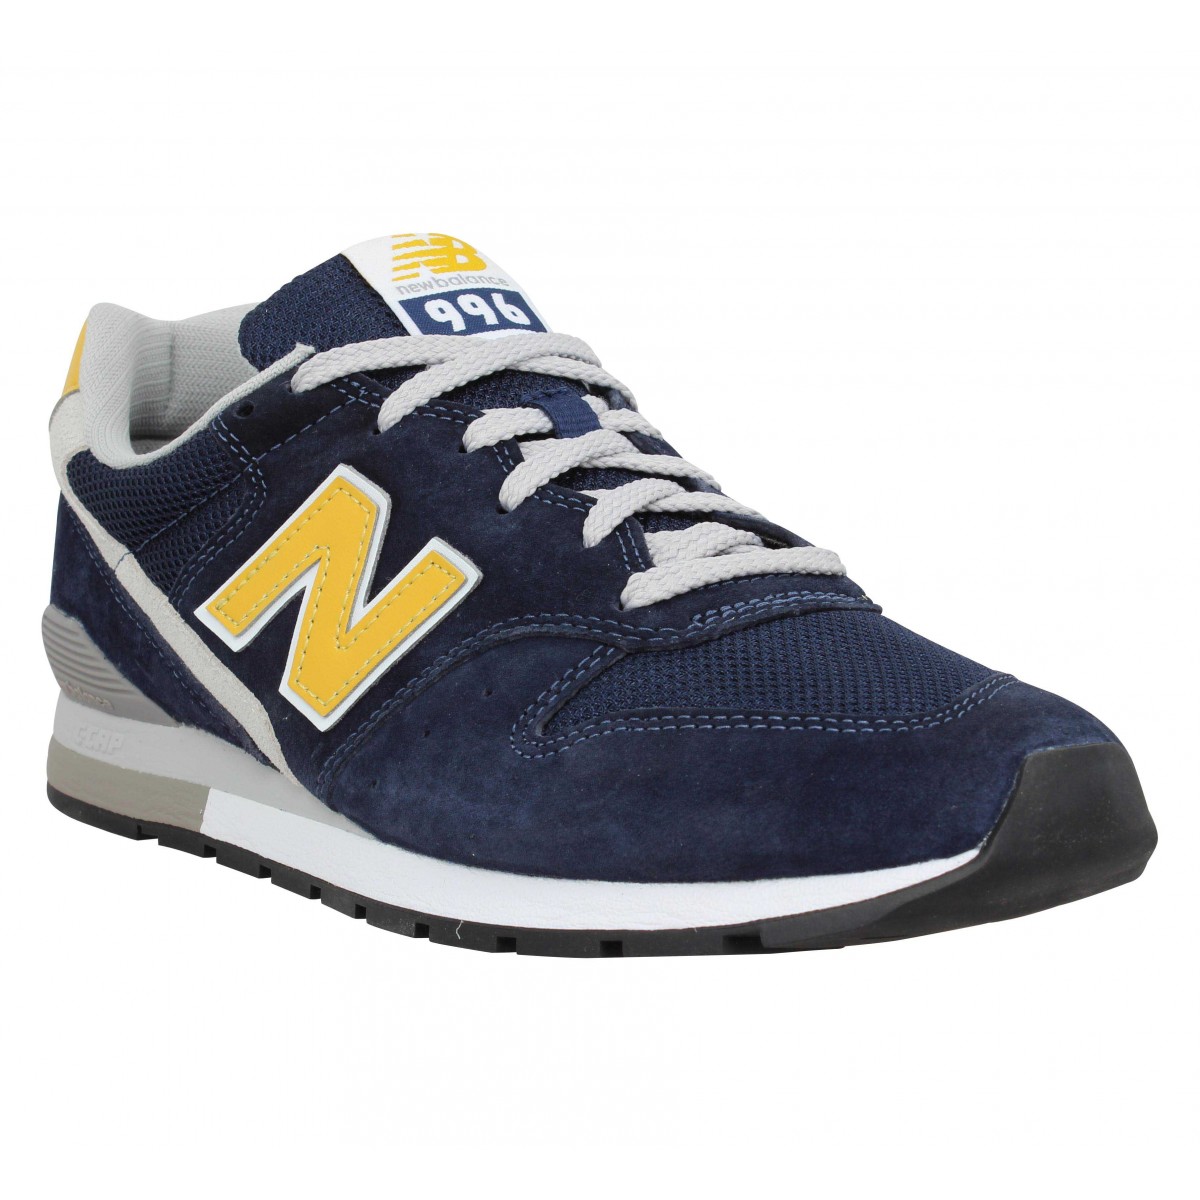 New balance 996 velours toile homme 